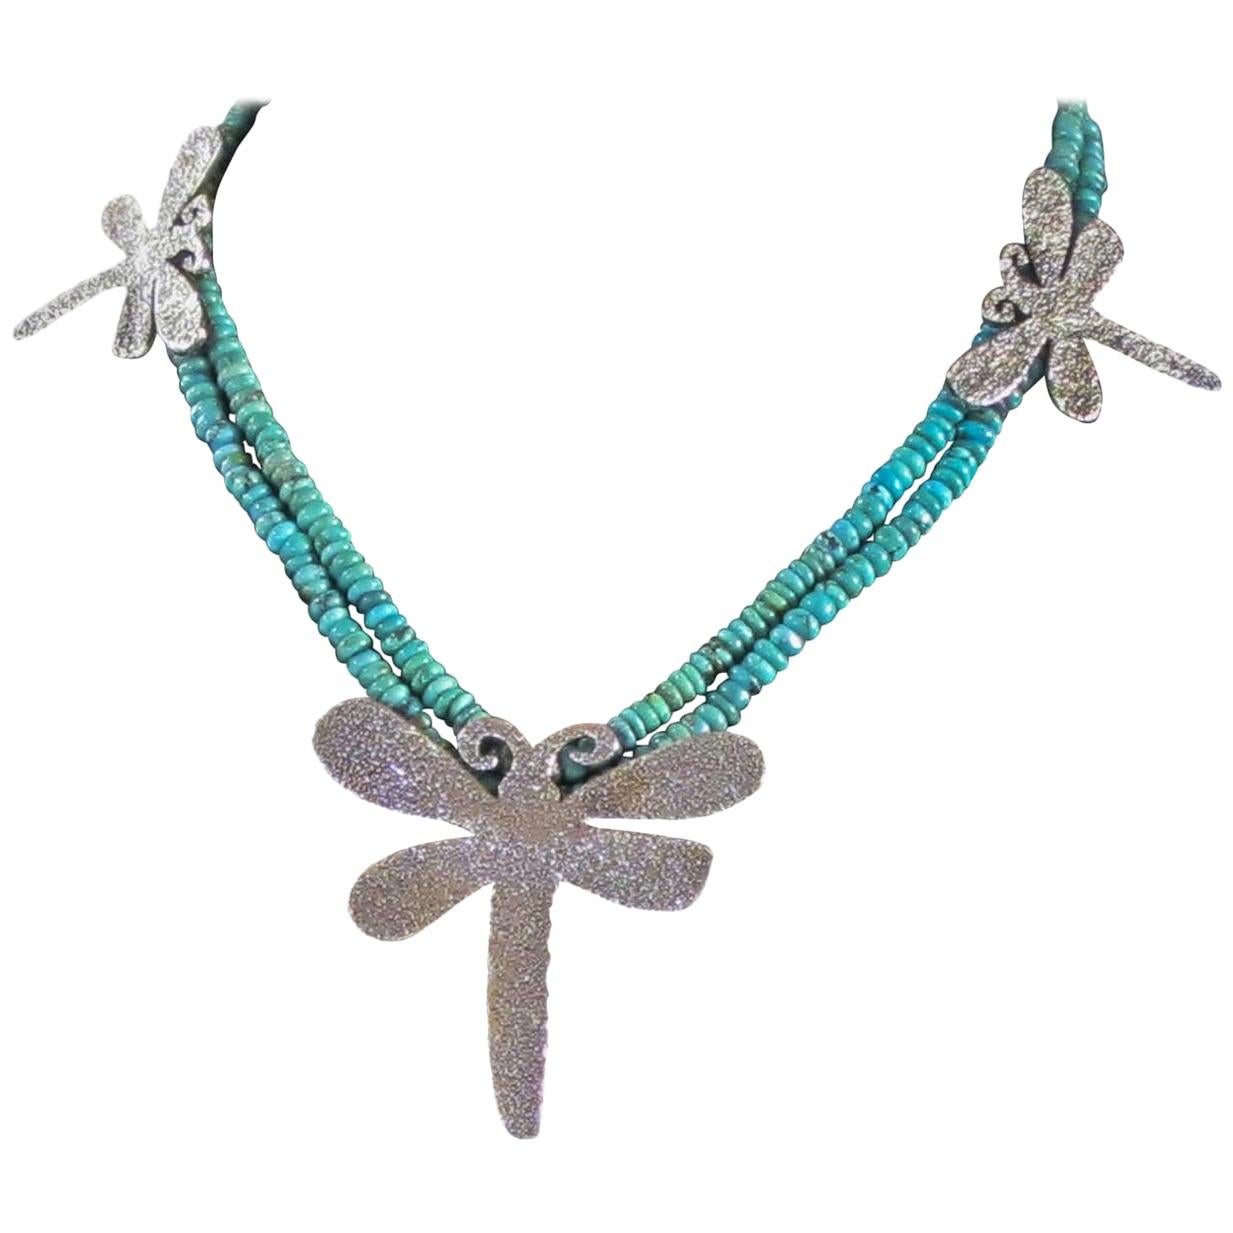 Dragonfly necklace, cast silver Kingman turquoise beads Melanie Yazzie Navajo For Sale